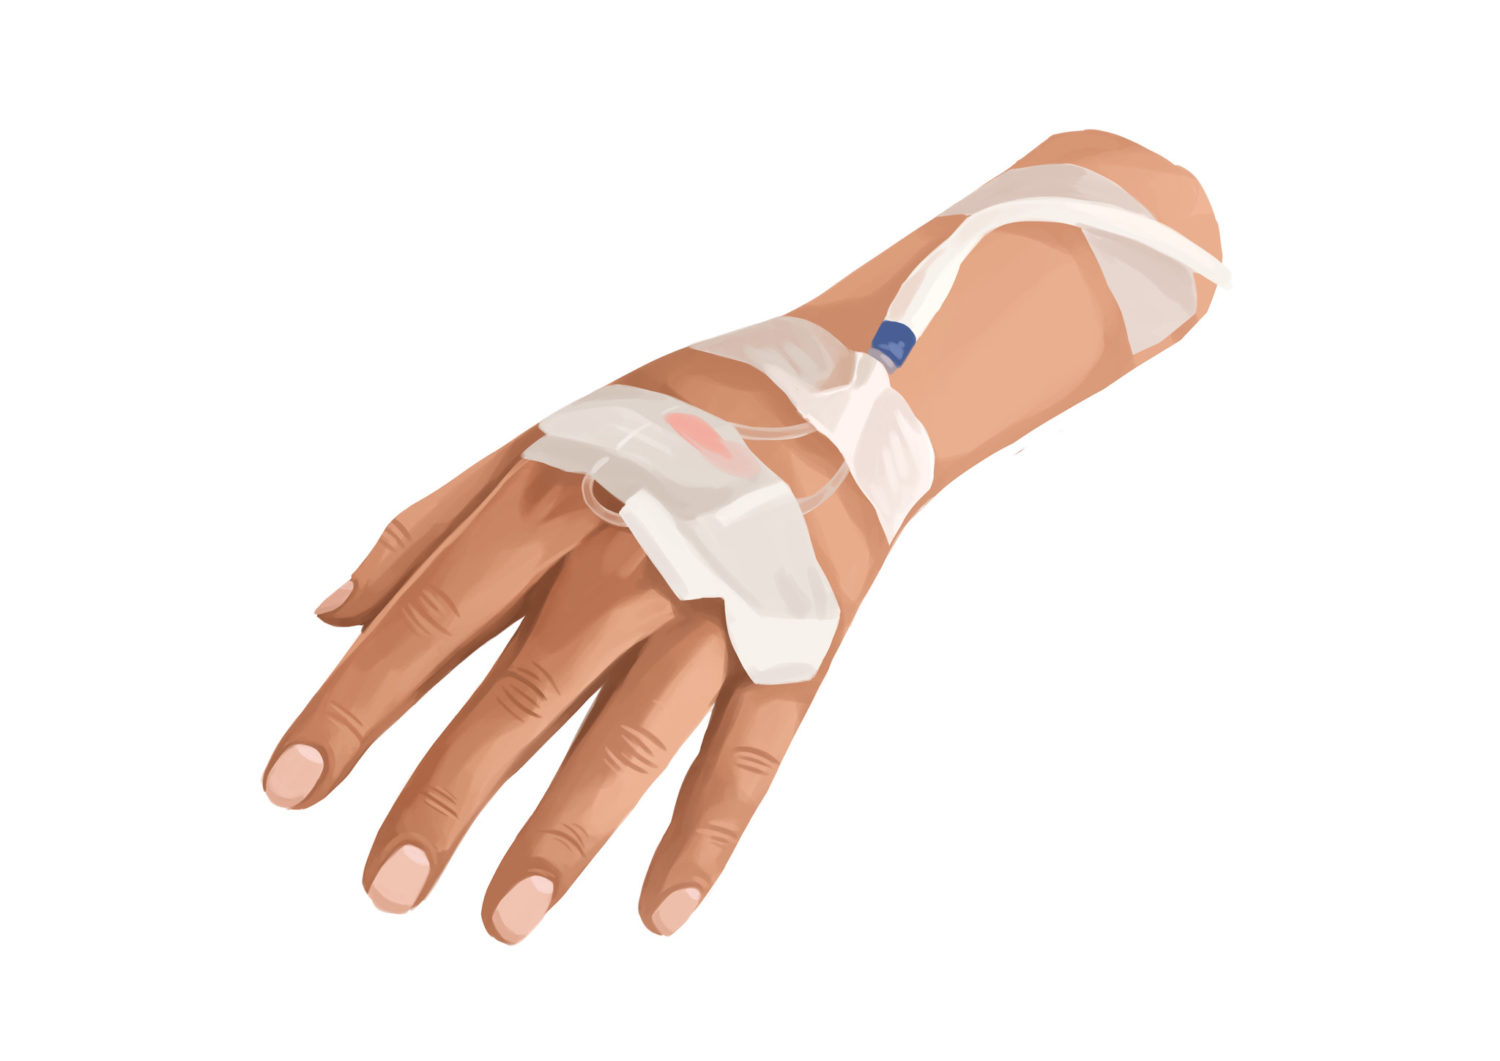 Illustration of a hand with an IV taped onto their wrist administering dental sedation medication